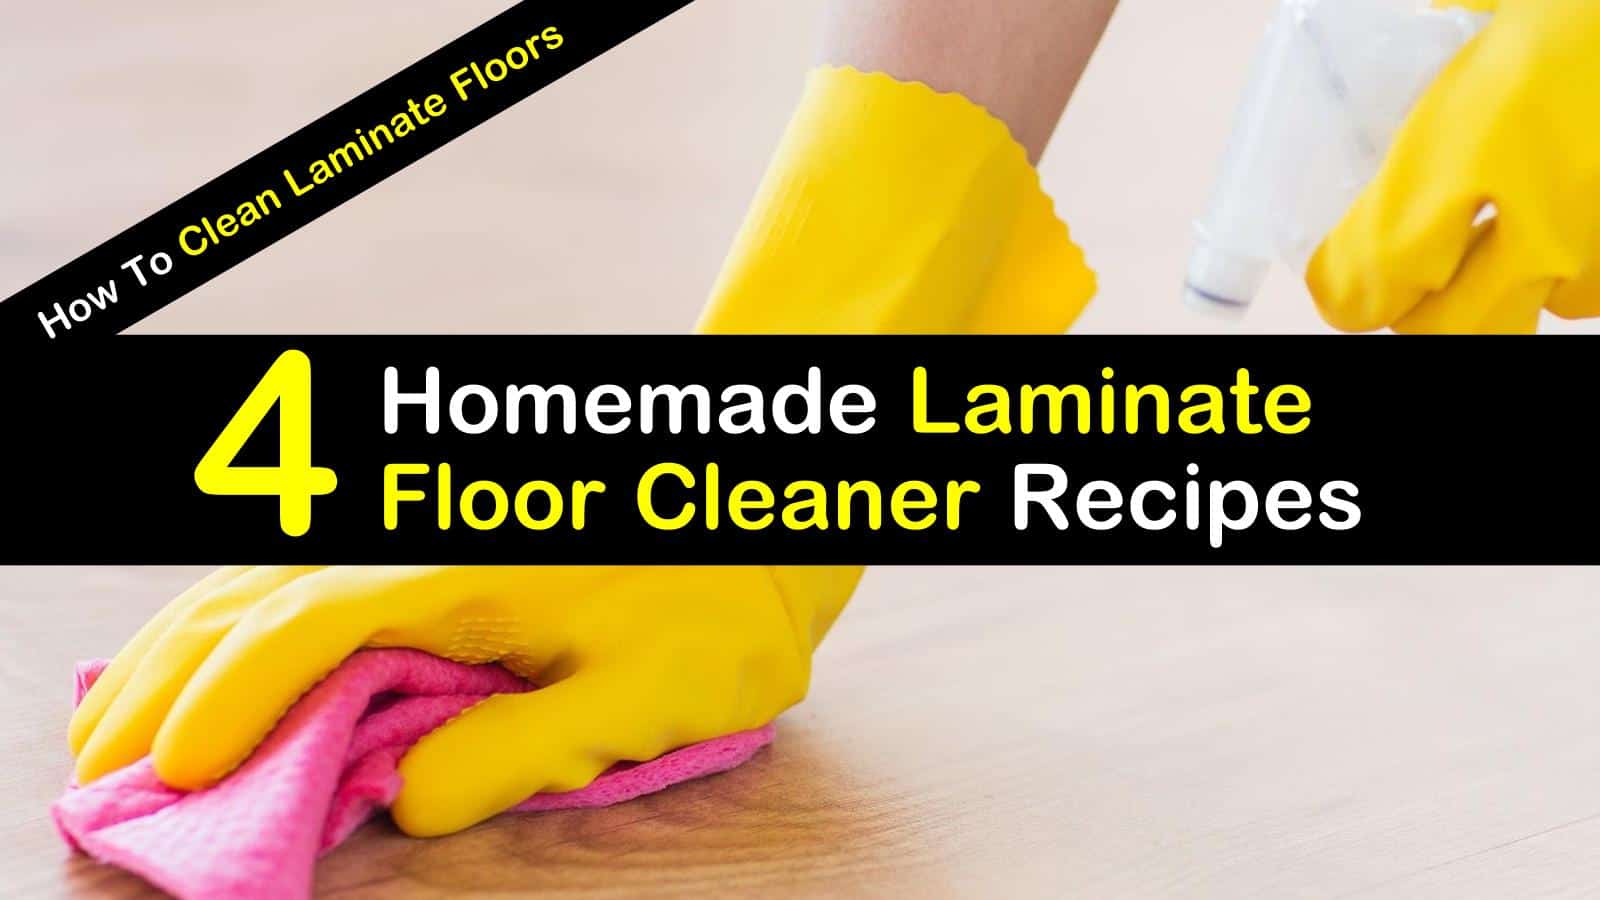 How To Clean Laminate Floors 4, Diy Cleaning Solution For Laminate Floors